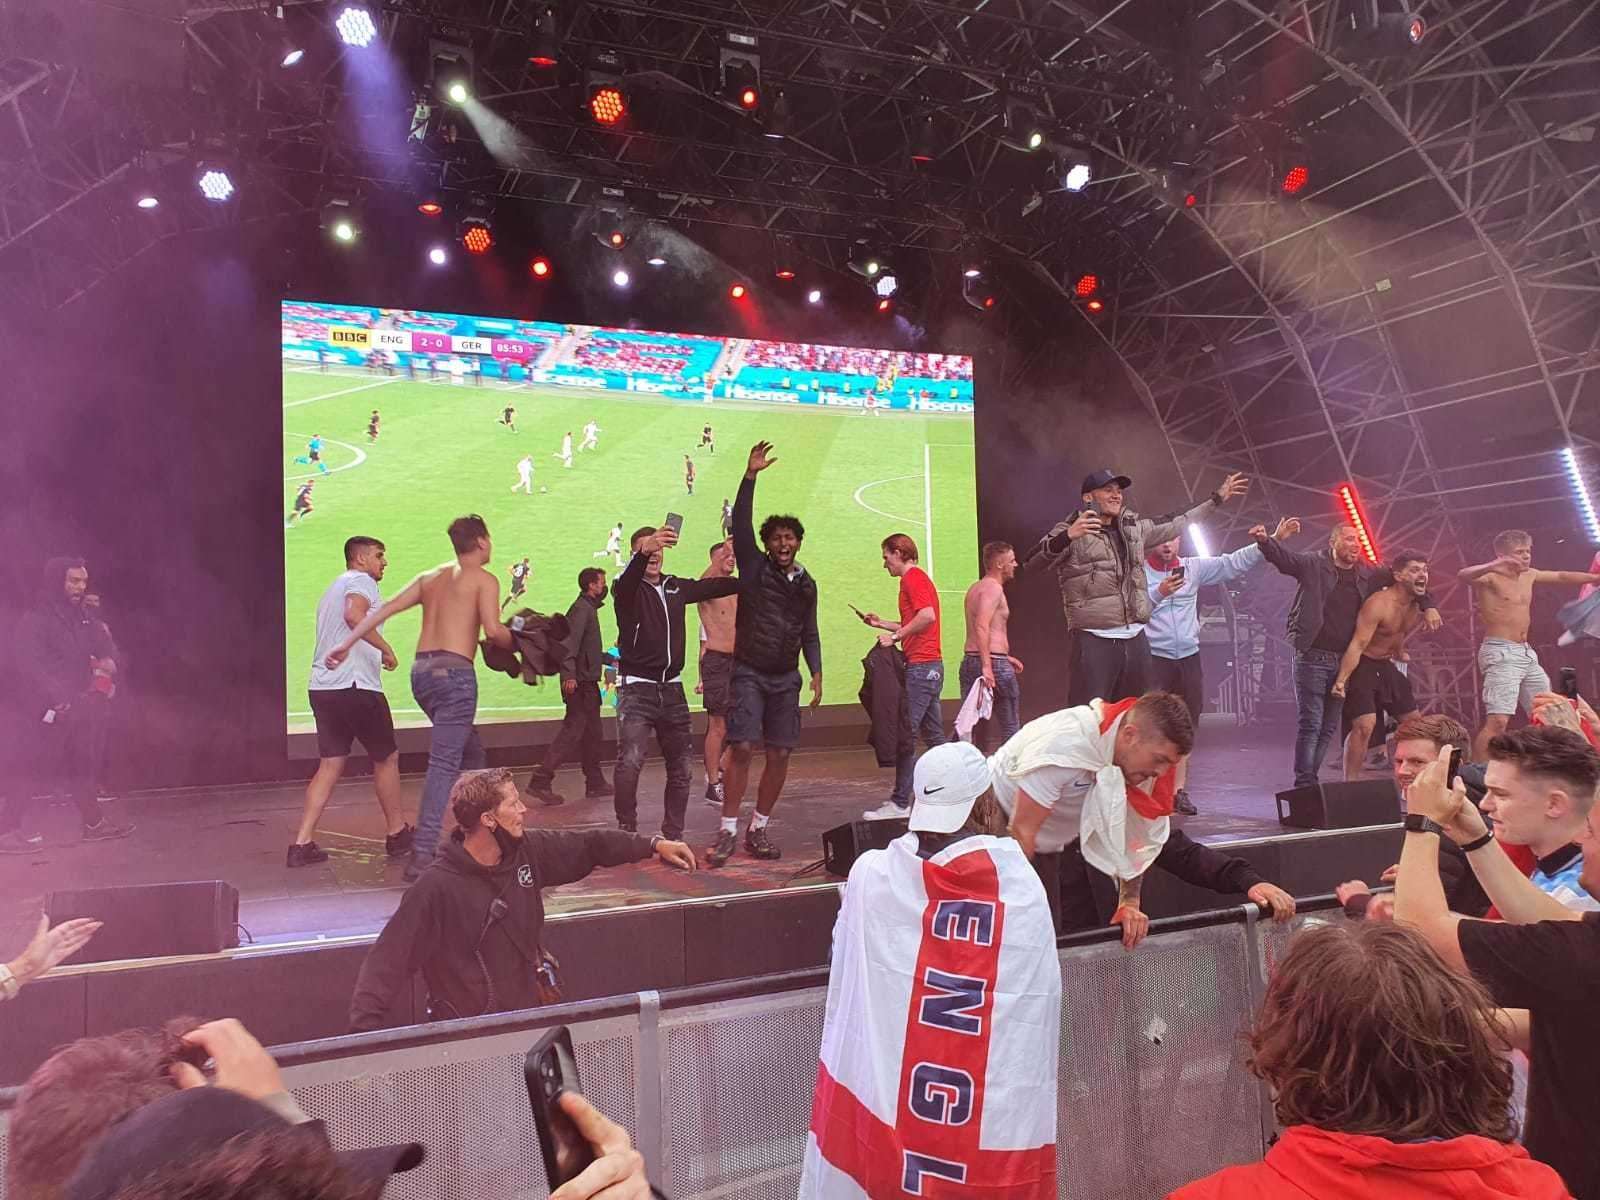 Fans climbed railings to get on the stage after England doubled their lead